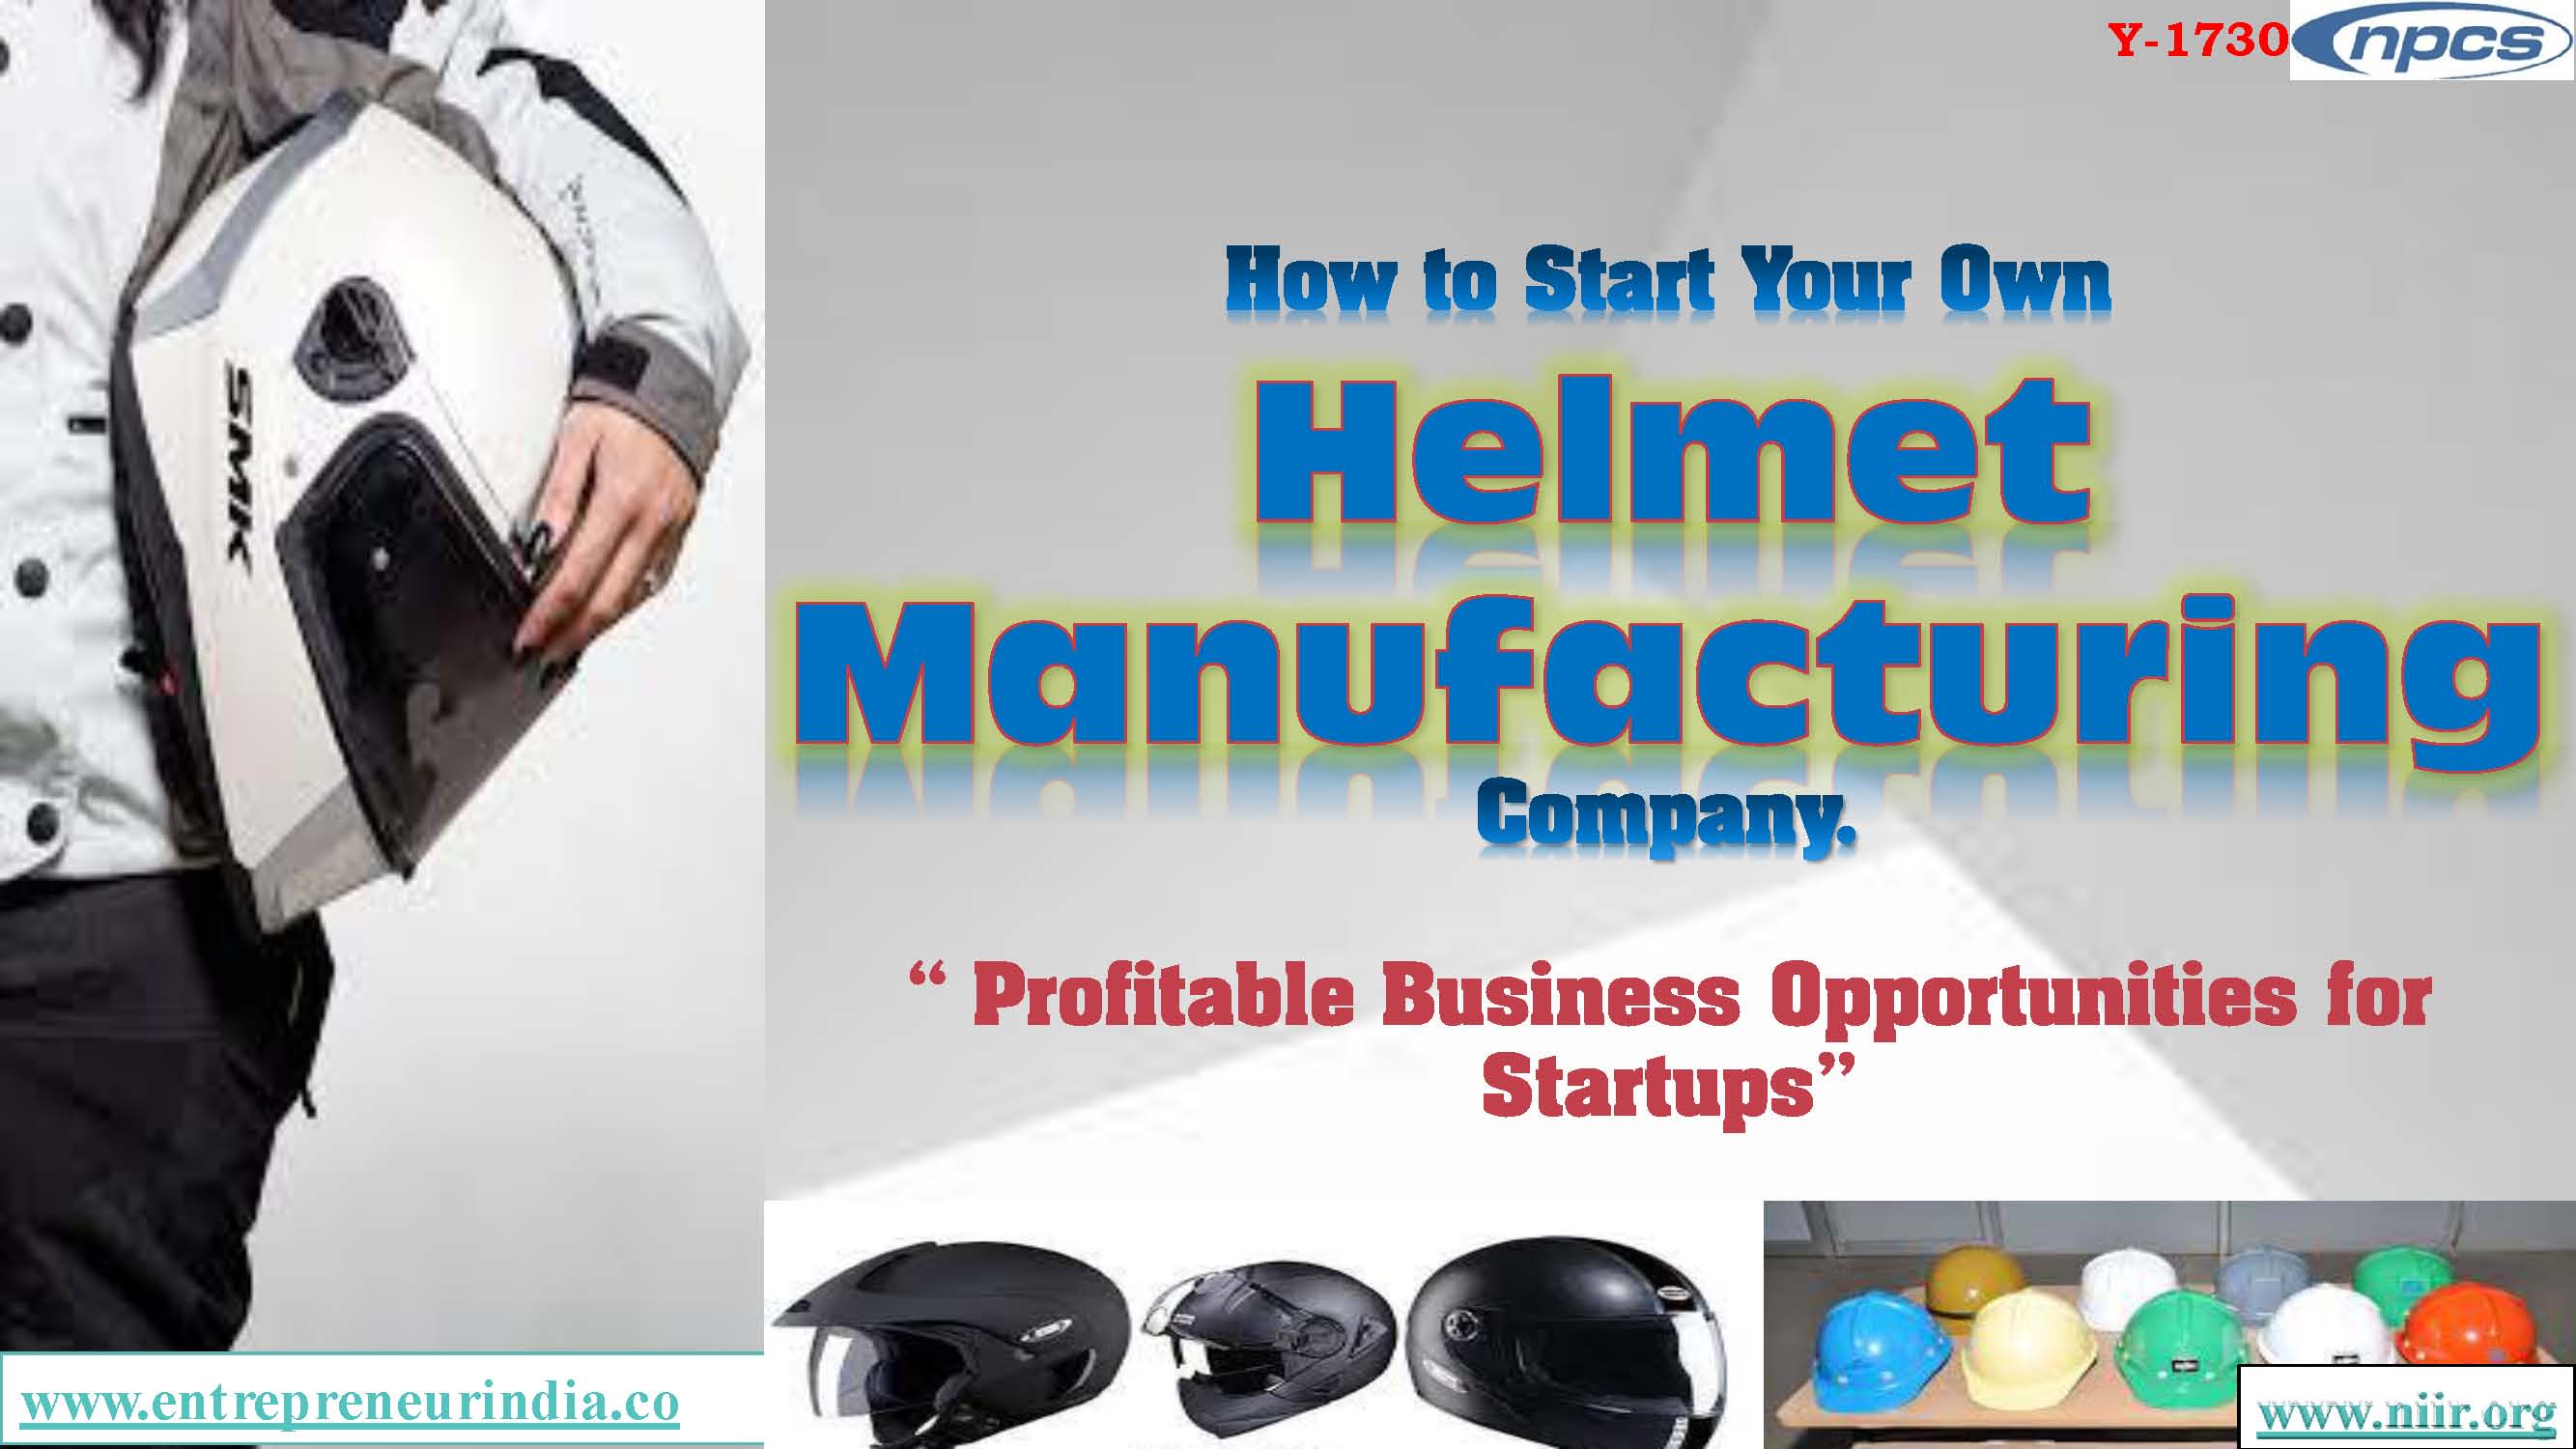 How to Start Your Own Helmet Manufacturing Company Profitable Business Opportunities for Startups